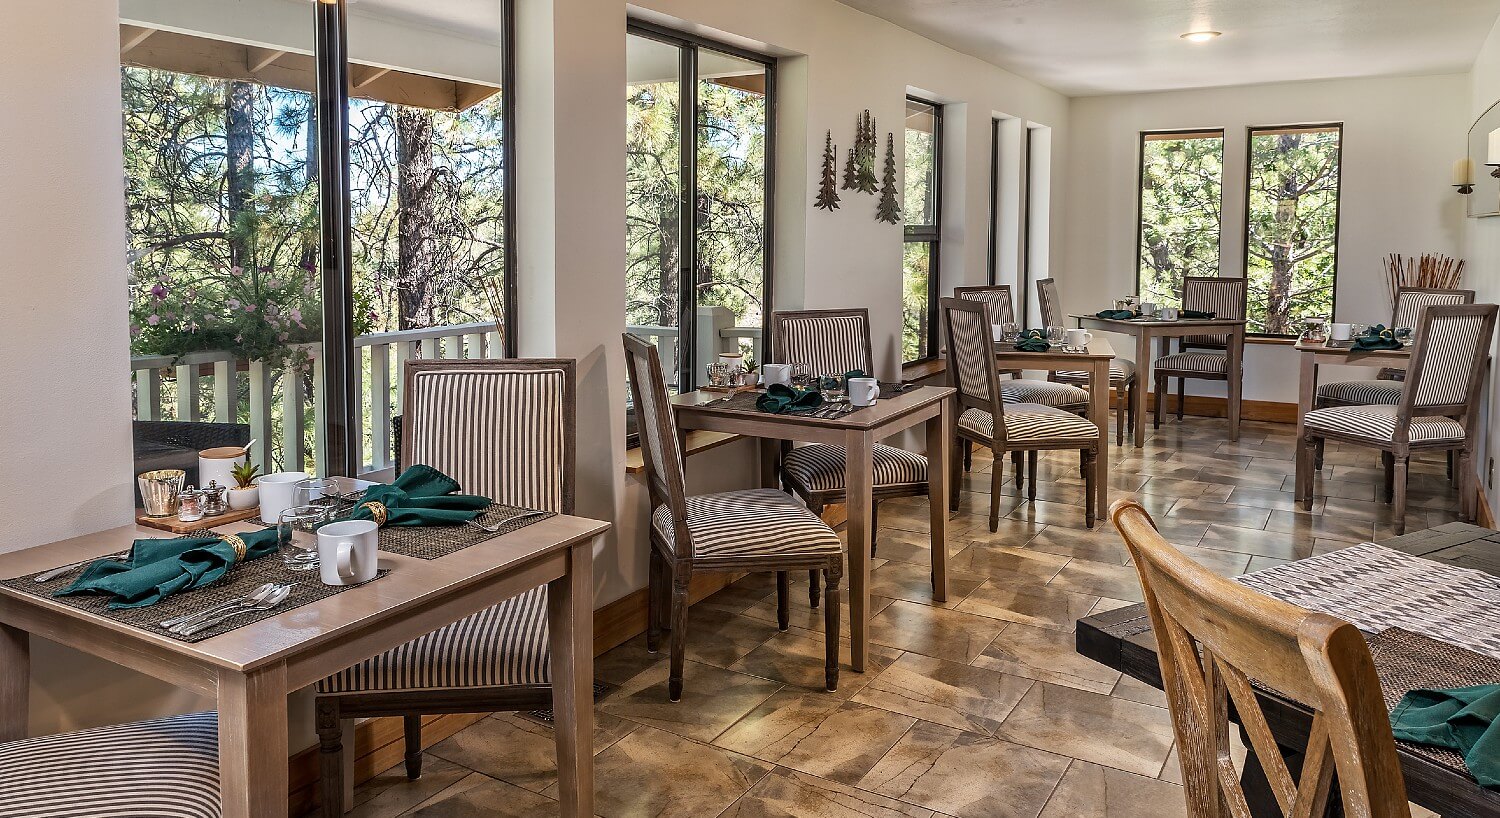 Large dining room surrounded by tall windows and six breakfast tables each set for two